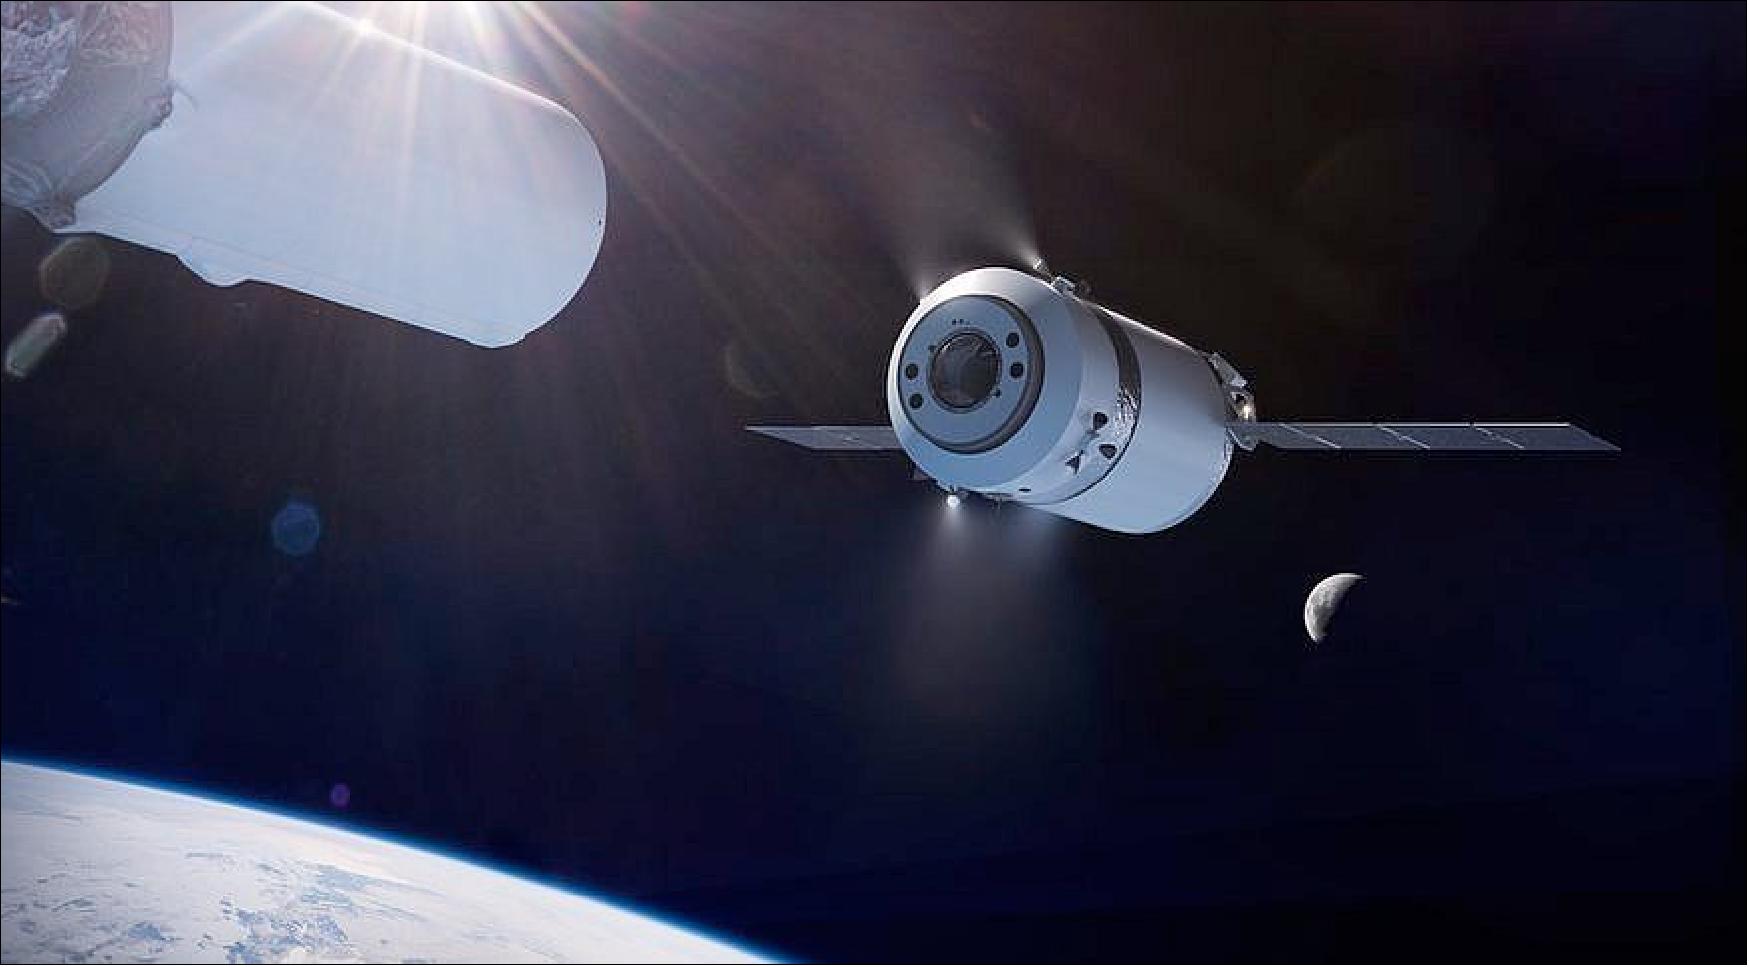 Figure 15: SpaceX's Dragon XL, seen here separating from the upper stage of its Falcon Heavy rocket, will deliver cargo to the lunar Gateway under a NASA contract awarded March 27 (image credit: SpaceX)